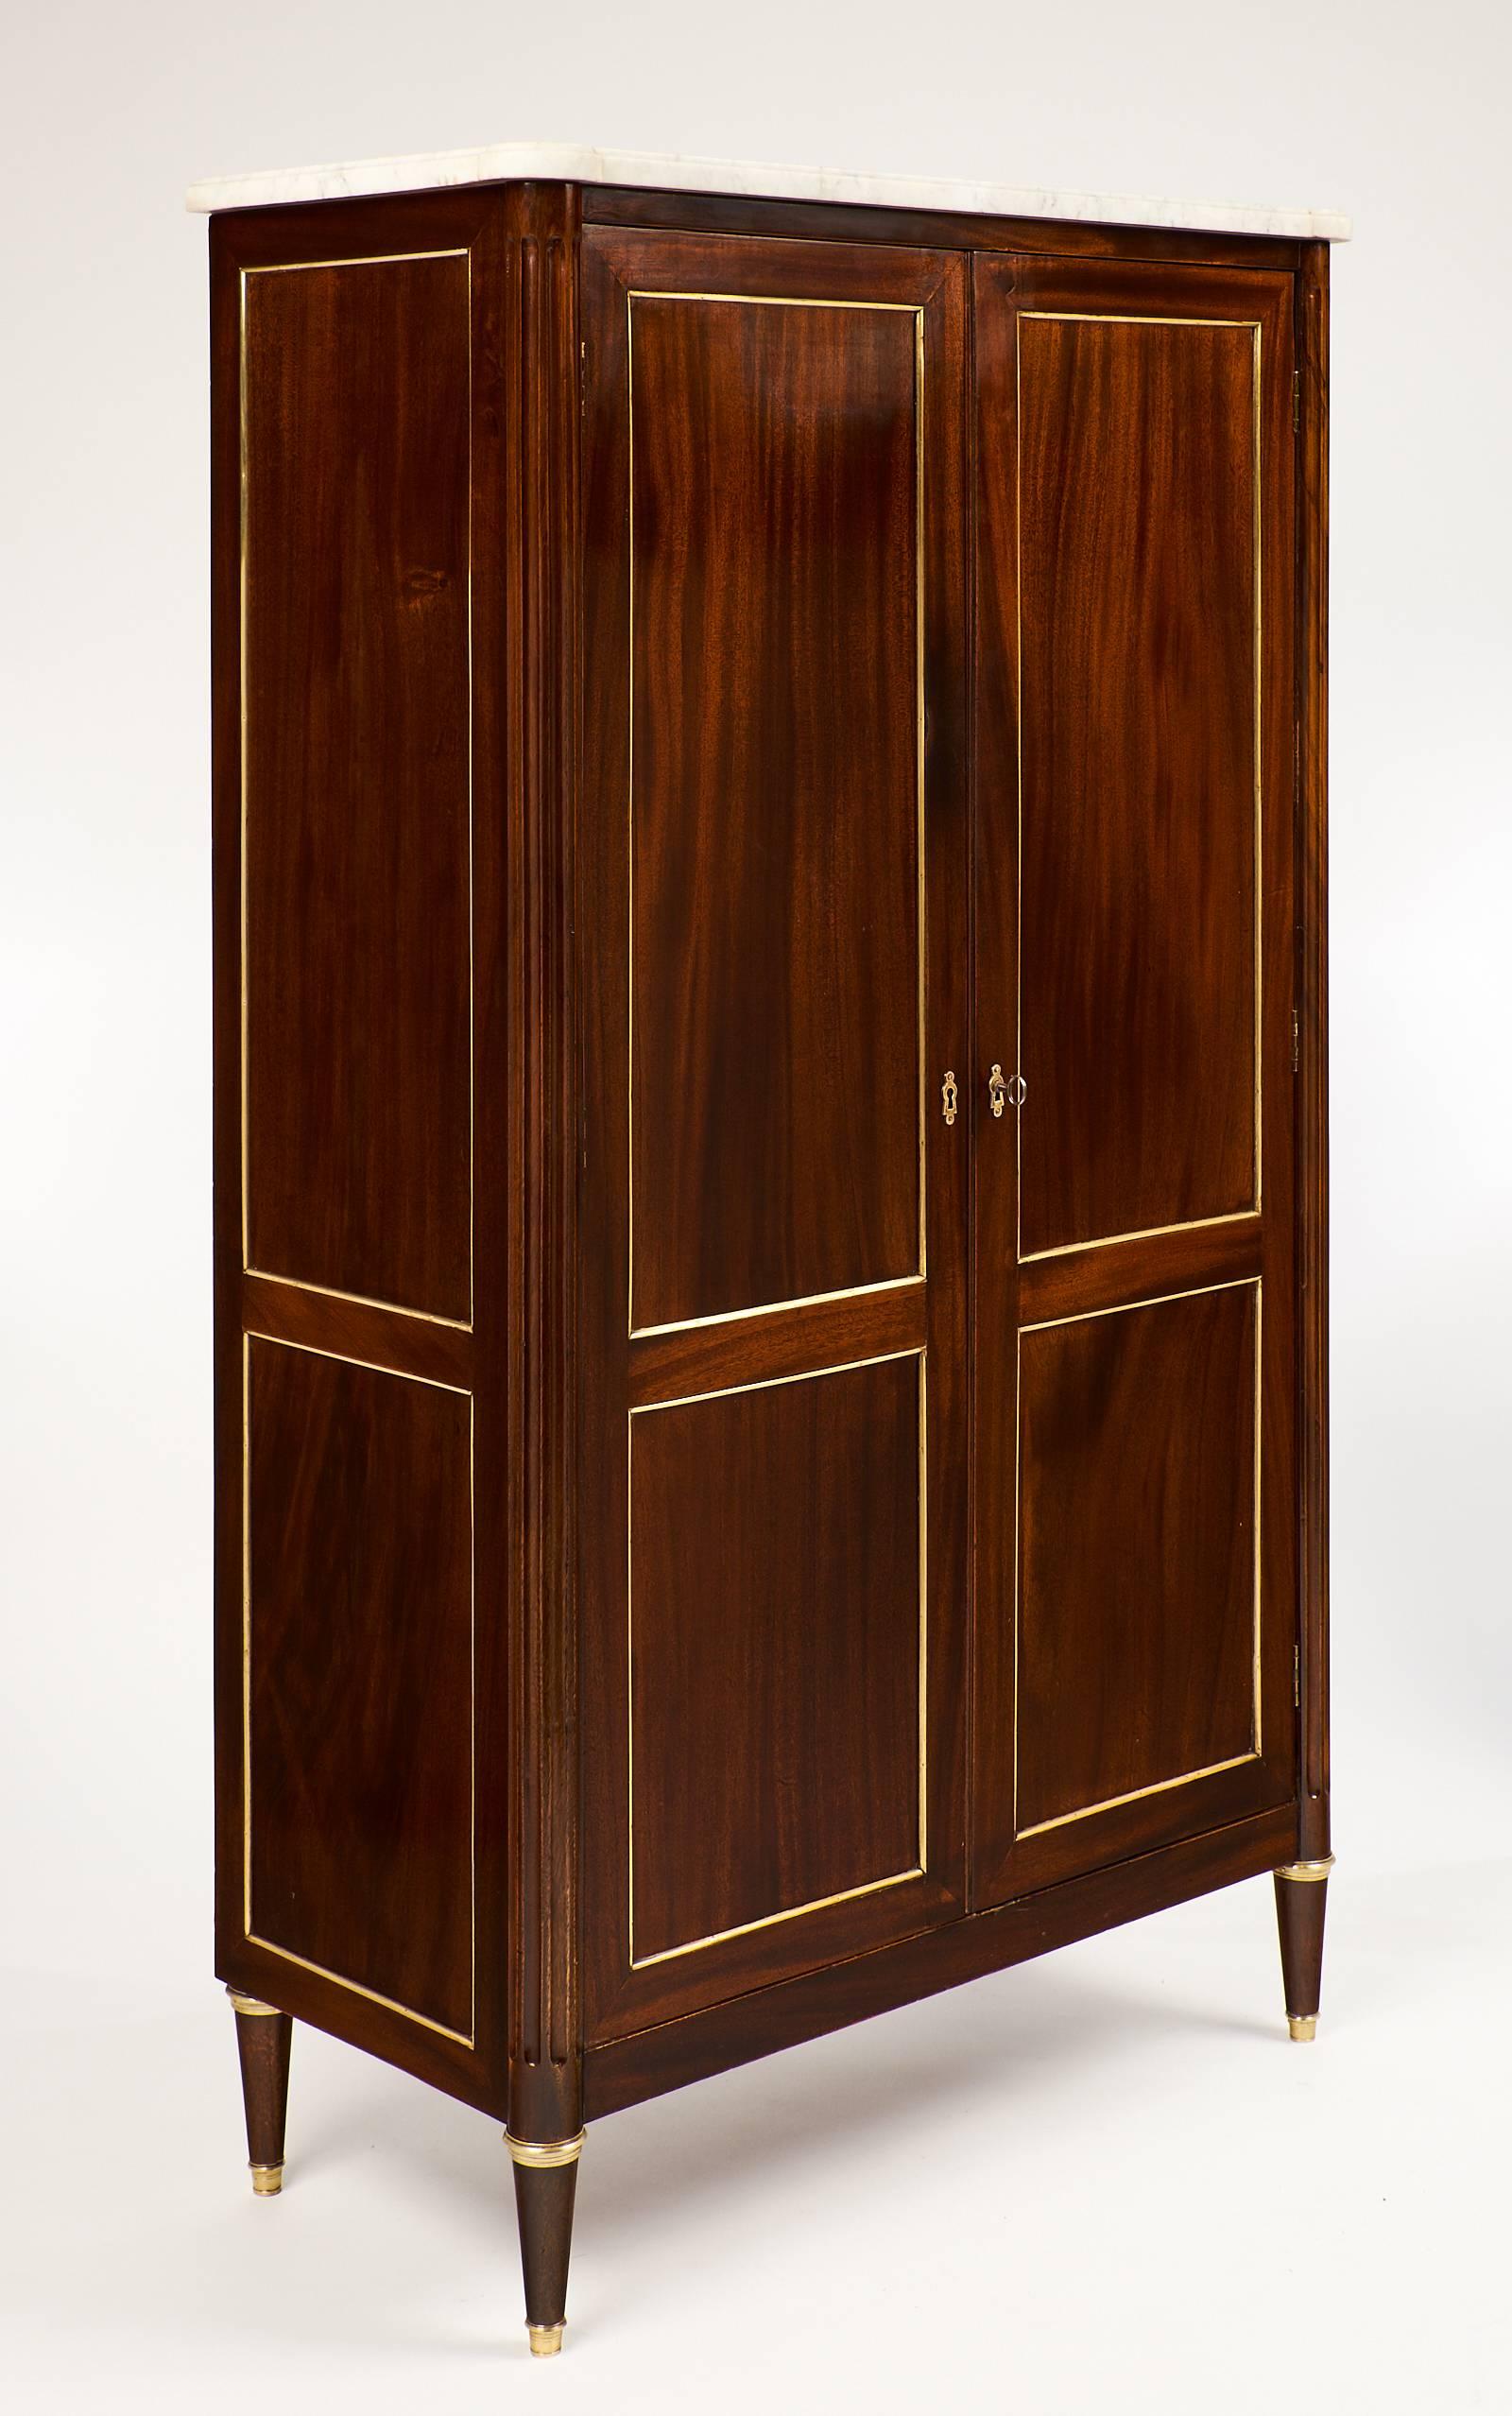 Of flamed mahogany and finished with a lustrous French polish, this stunning armoire features a Carrara marble top, original brass hardware and gilt trims, tapered legs and fluted columns on either side of the doors. The interior shelving makes this